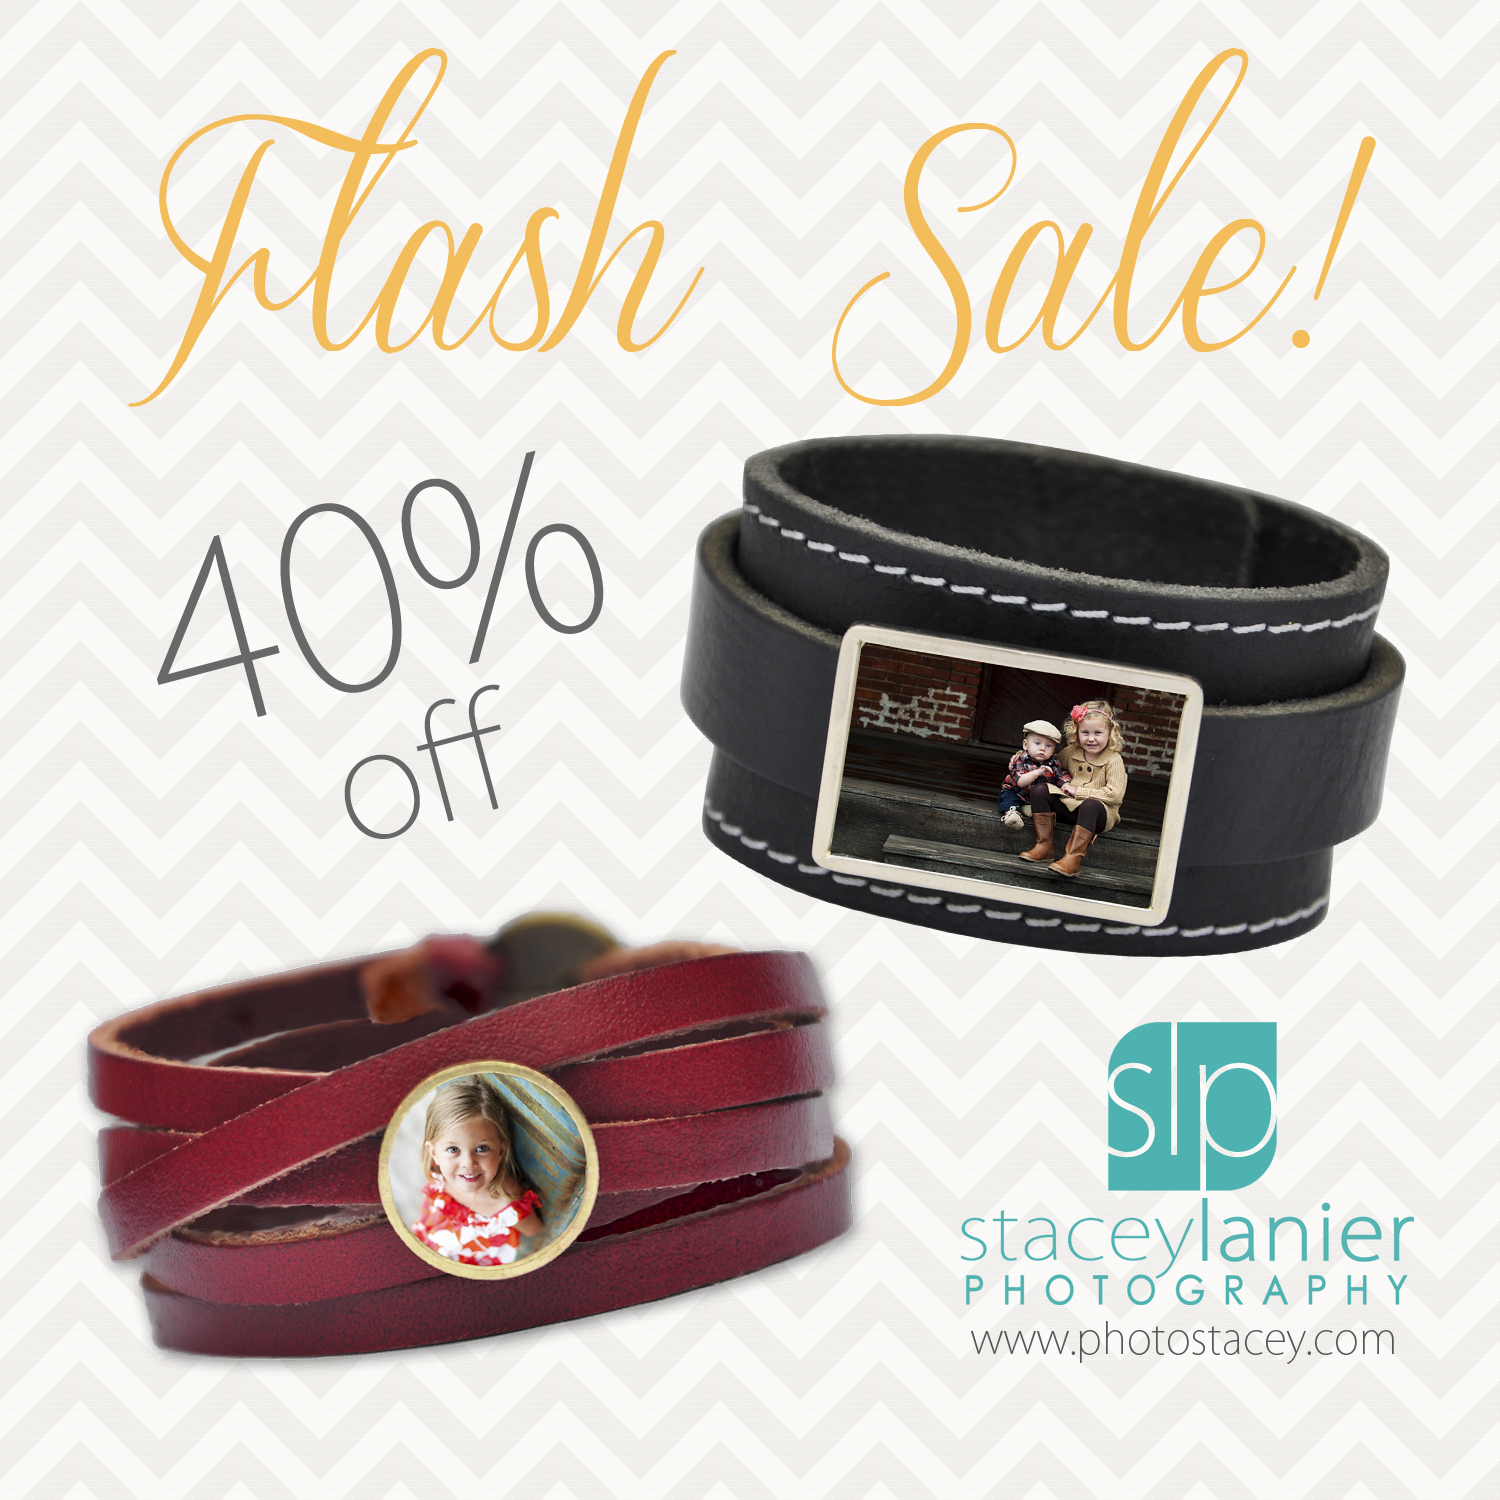 FLASH SALE – 40% Off Leather Charm Bracelets Today Only!